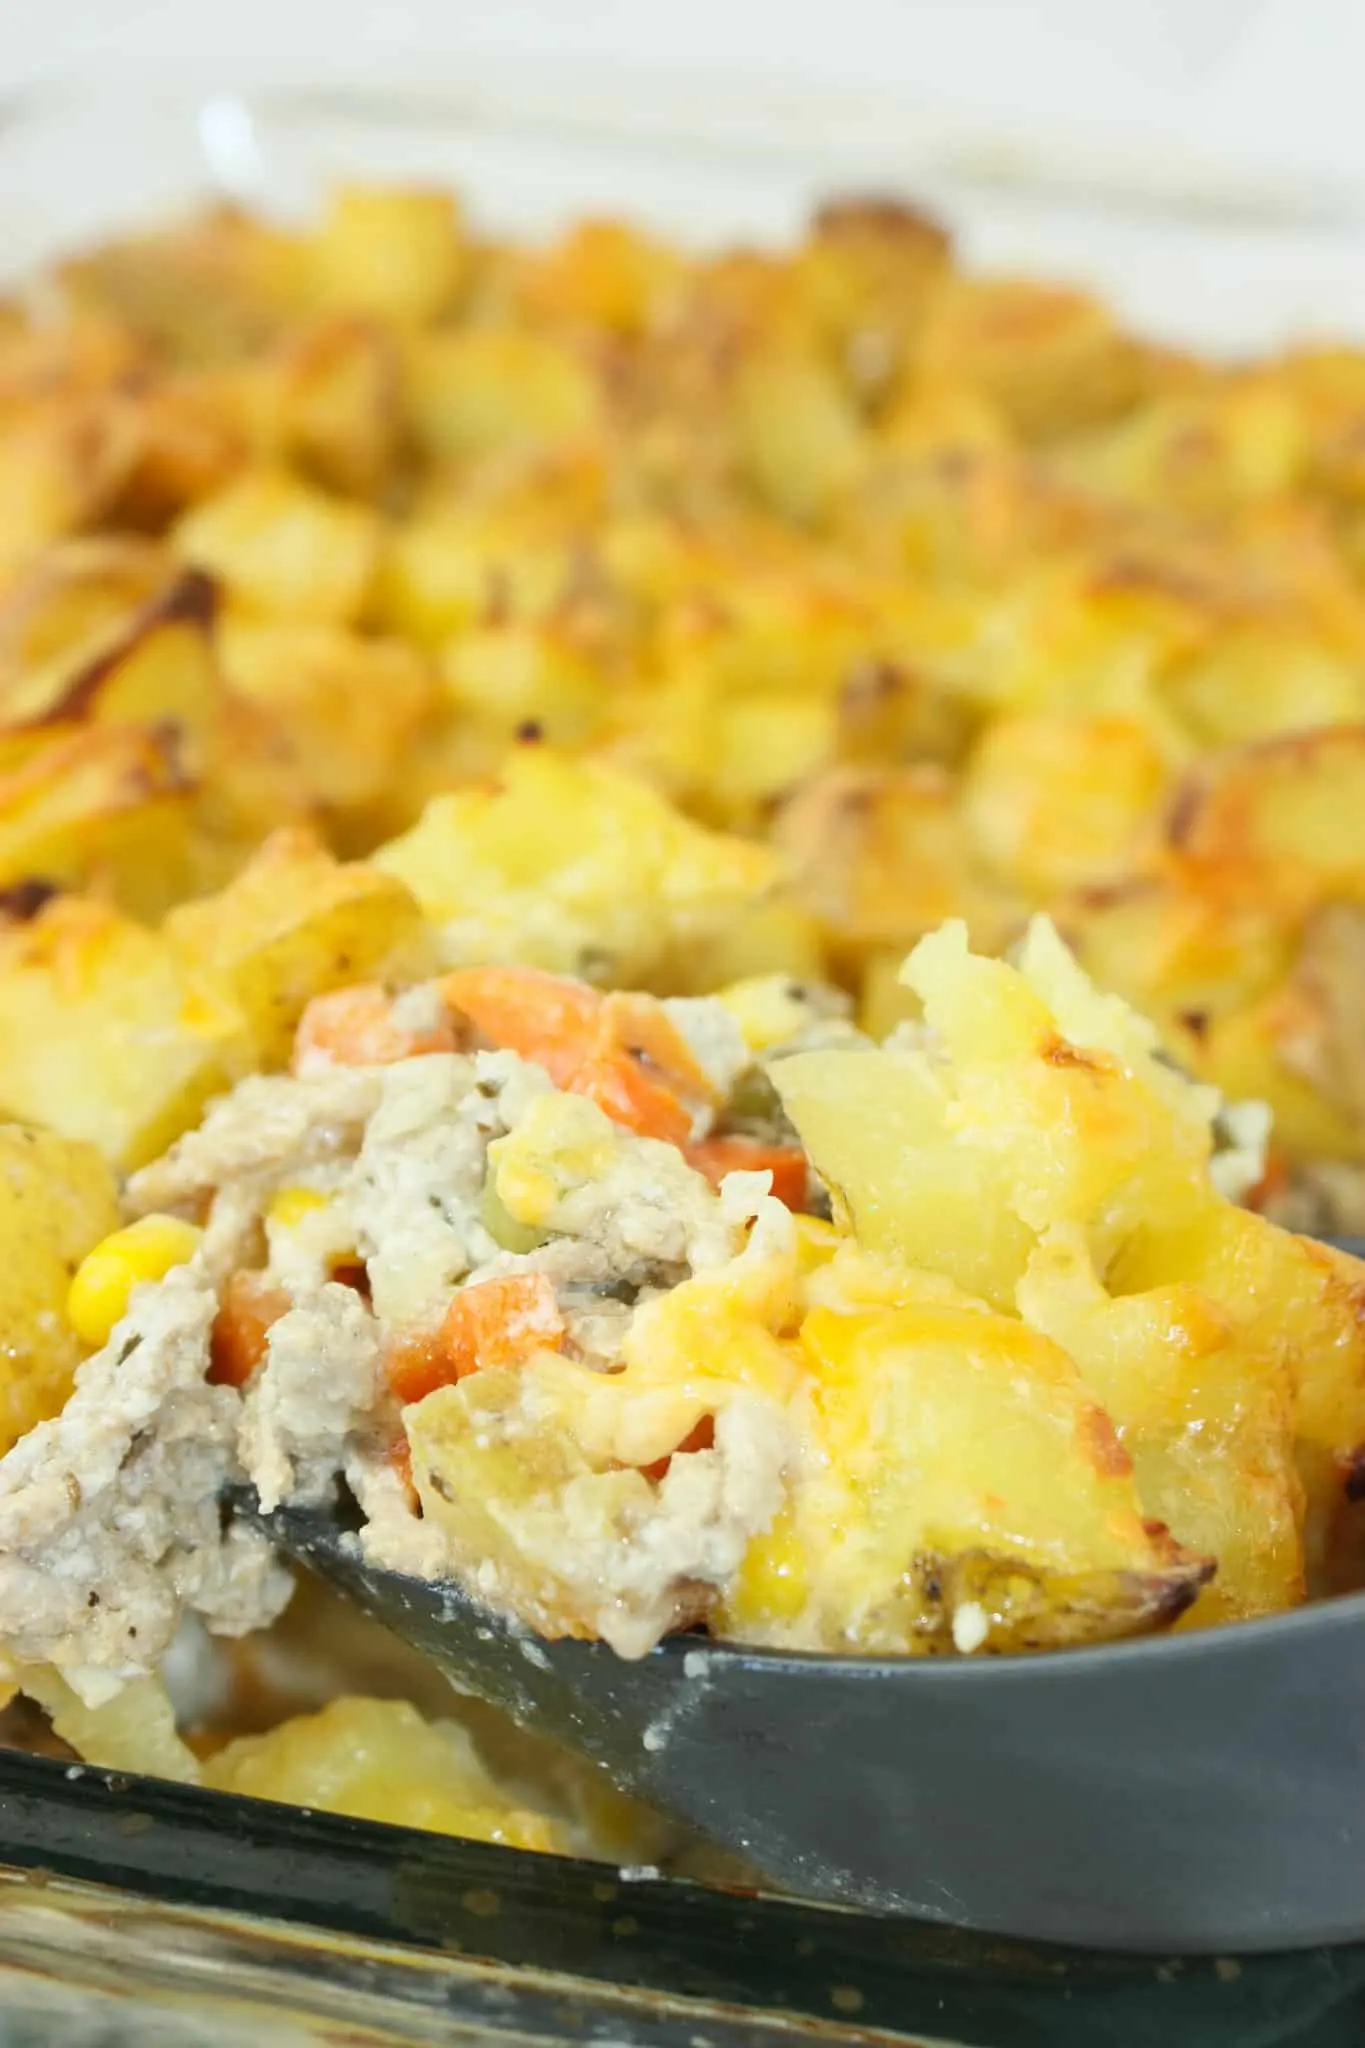 Ground Turkey and Potato Casserole is an easy dinner recipe that is loaded with potatoes, vegetables and turkey.  The gluten free sauce not only adds moisture but flavour as well.